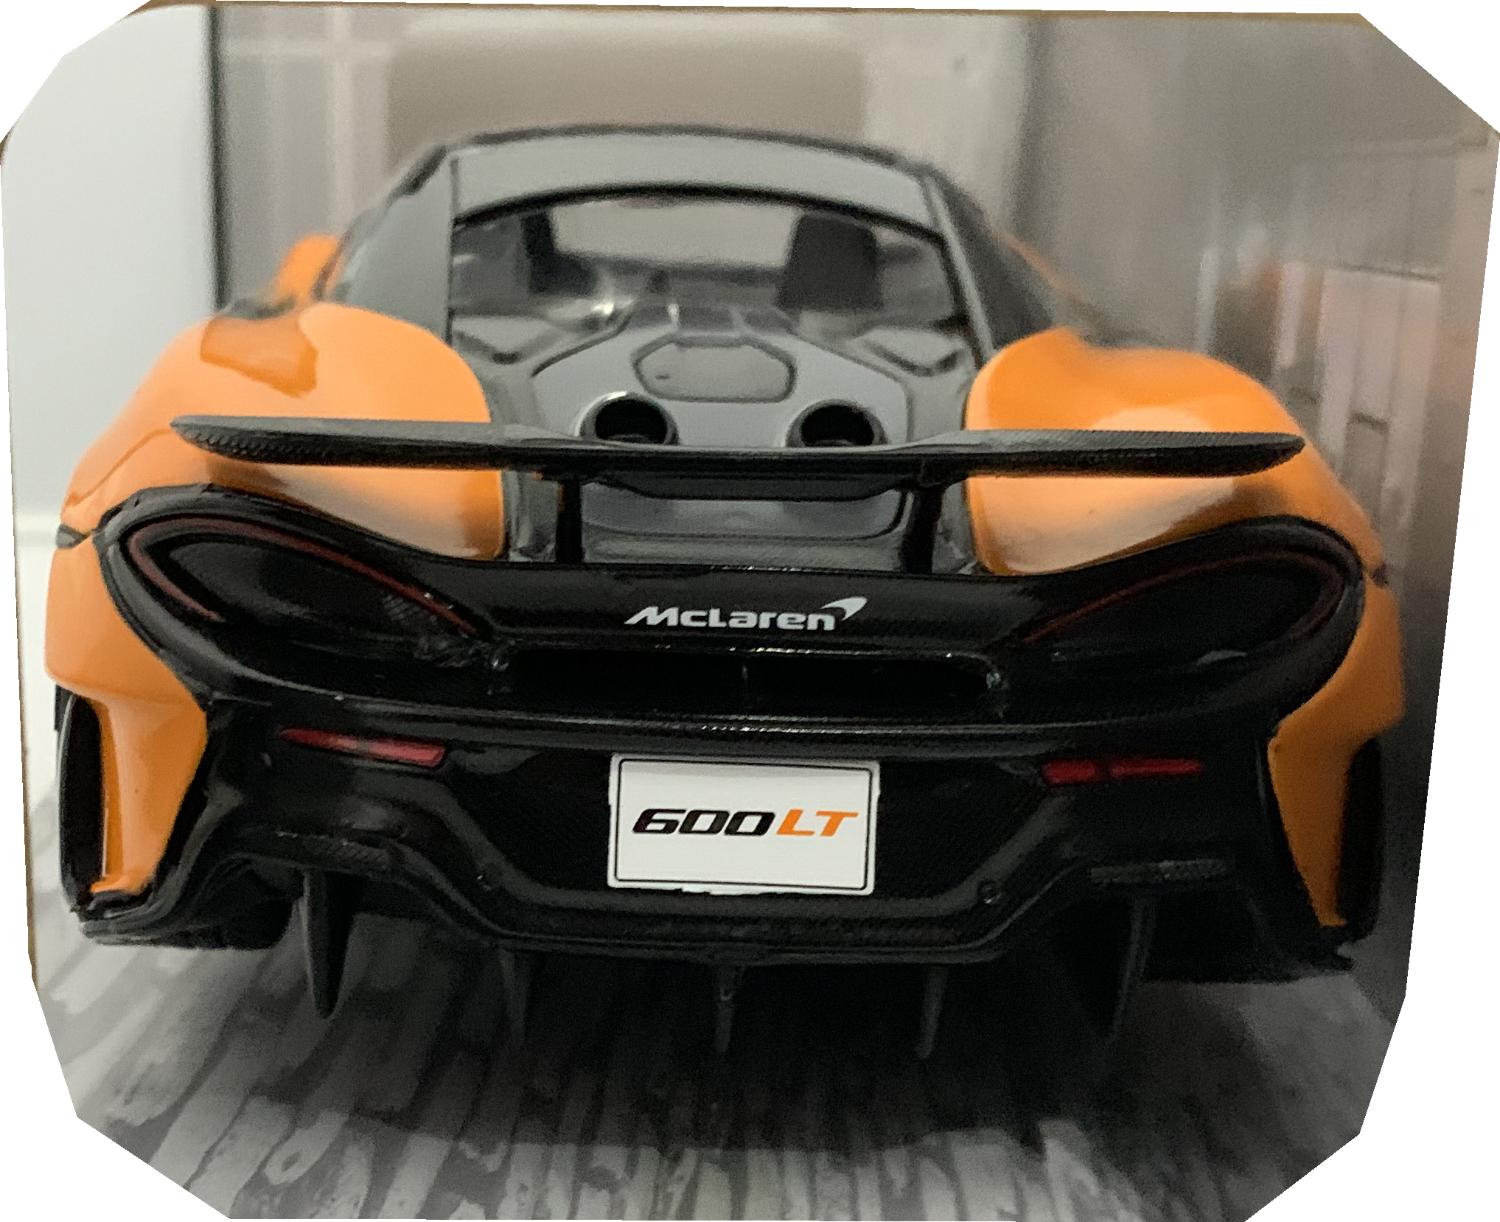 An excellent scale model of the McLaren 600LT with high level of detail throughout, all authentically recreated.  Model mounted on a removable plinth and is presented in a window display box.    The car is approx. 25 cm long and the presentation box is 31 cm long